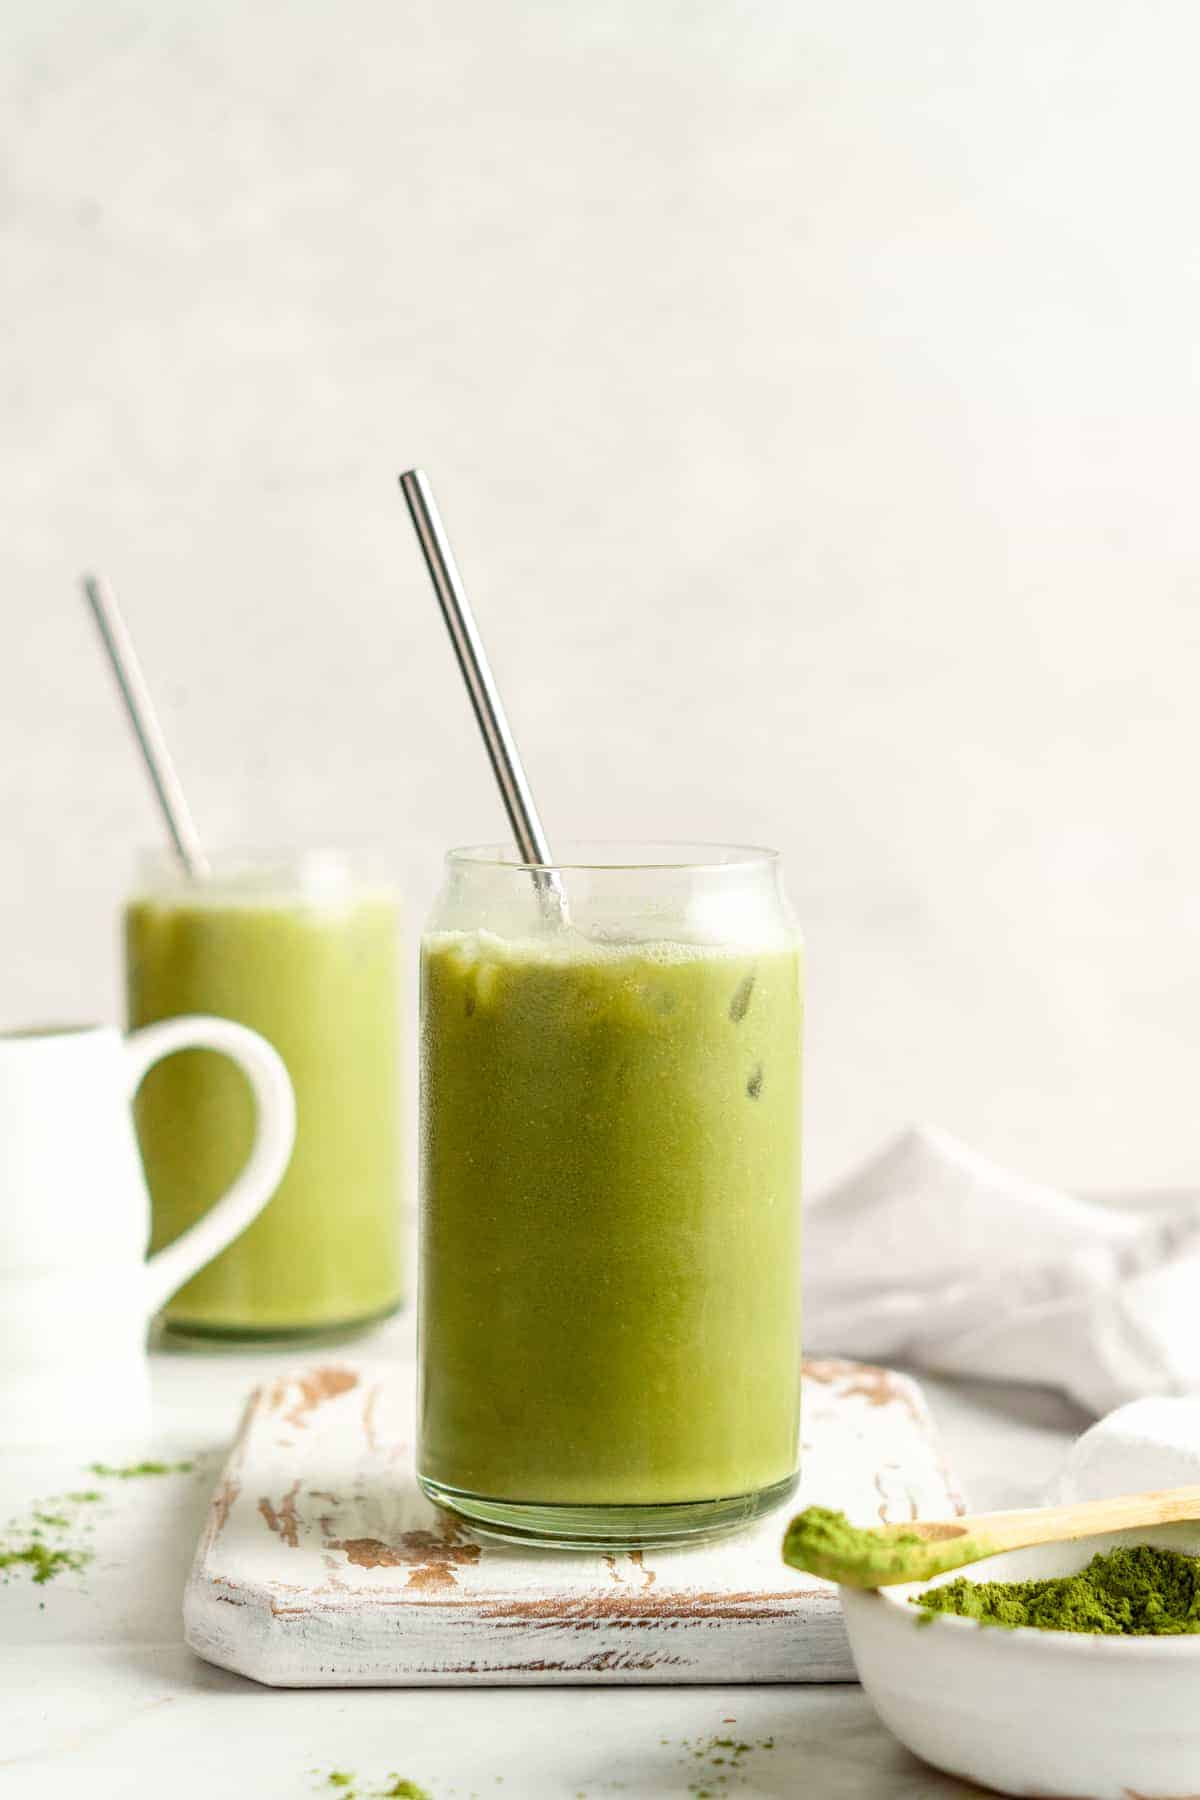 Two iced matcha lattes in glass tumblers with stainless steel straws